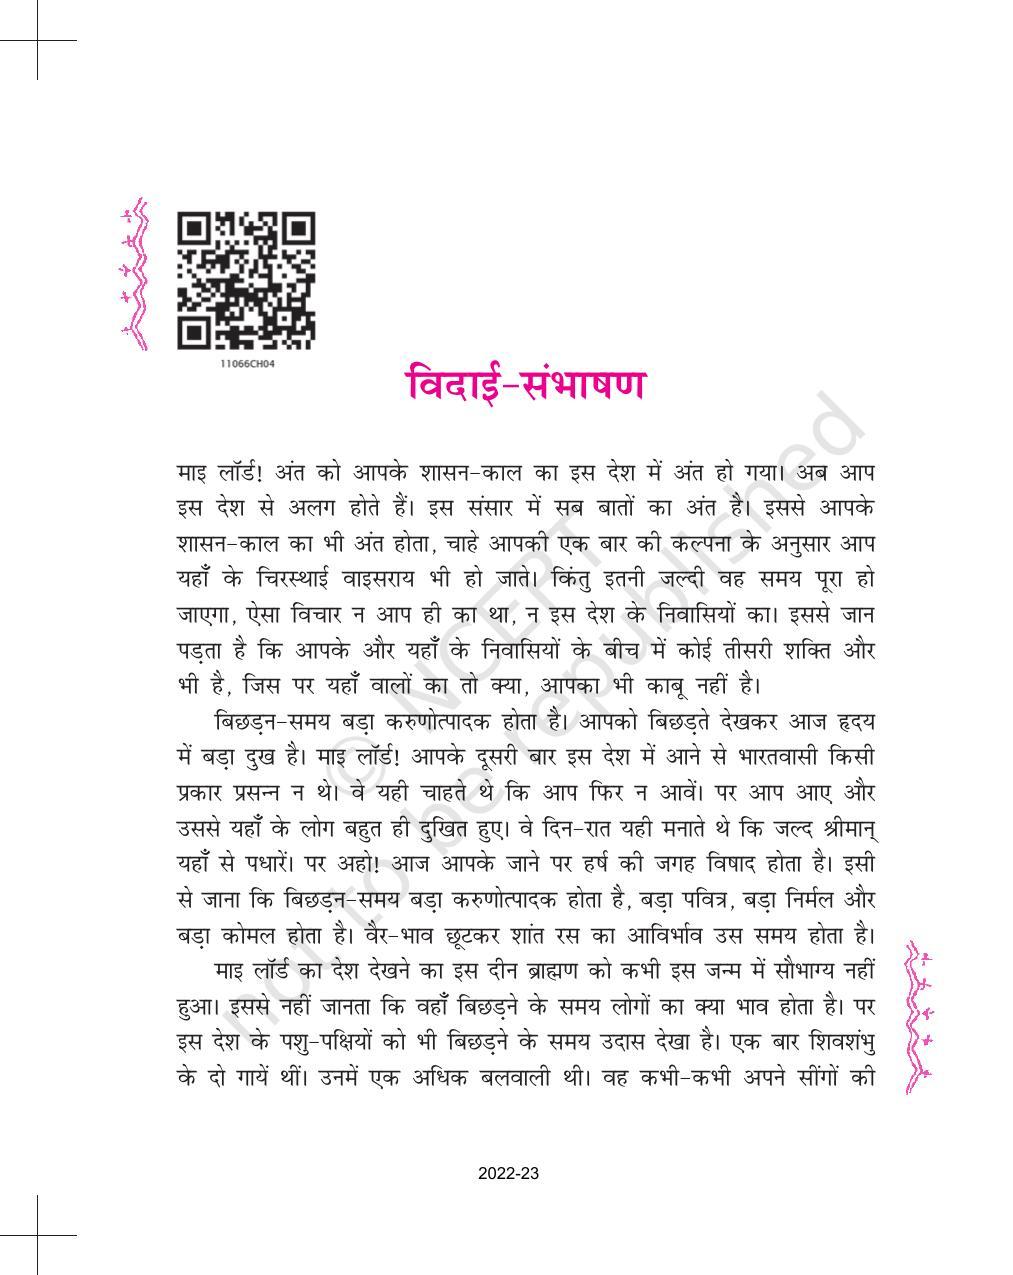 NCERT Book for Class 11 Hindi Aroh Chapter 4 विदाई – संभाषण - Page 3